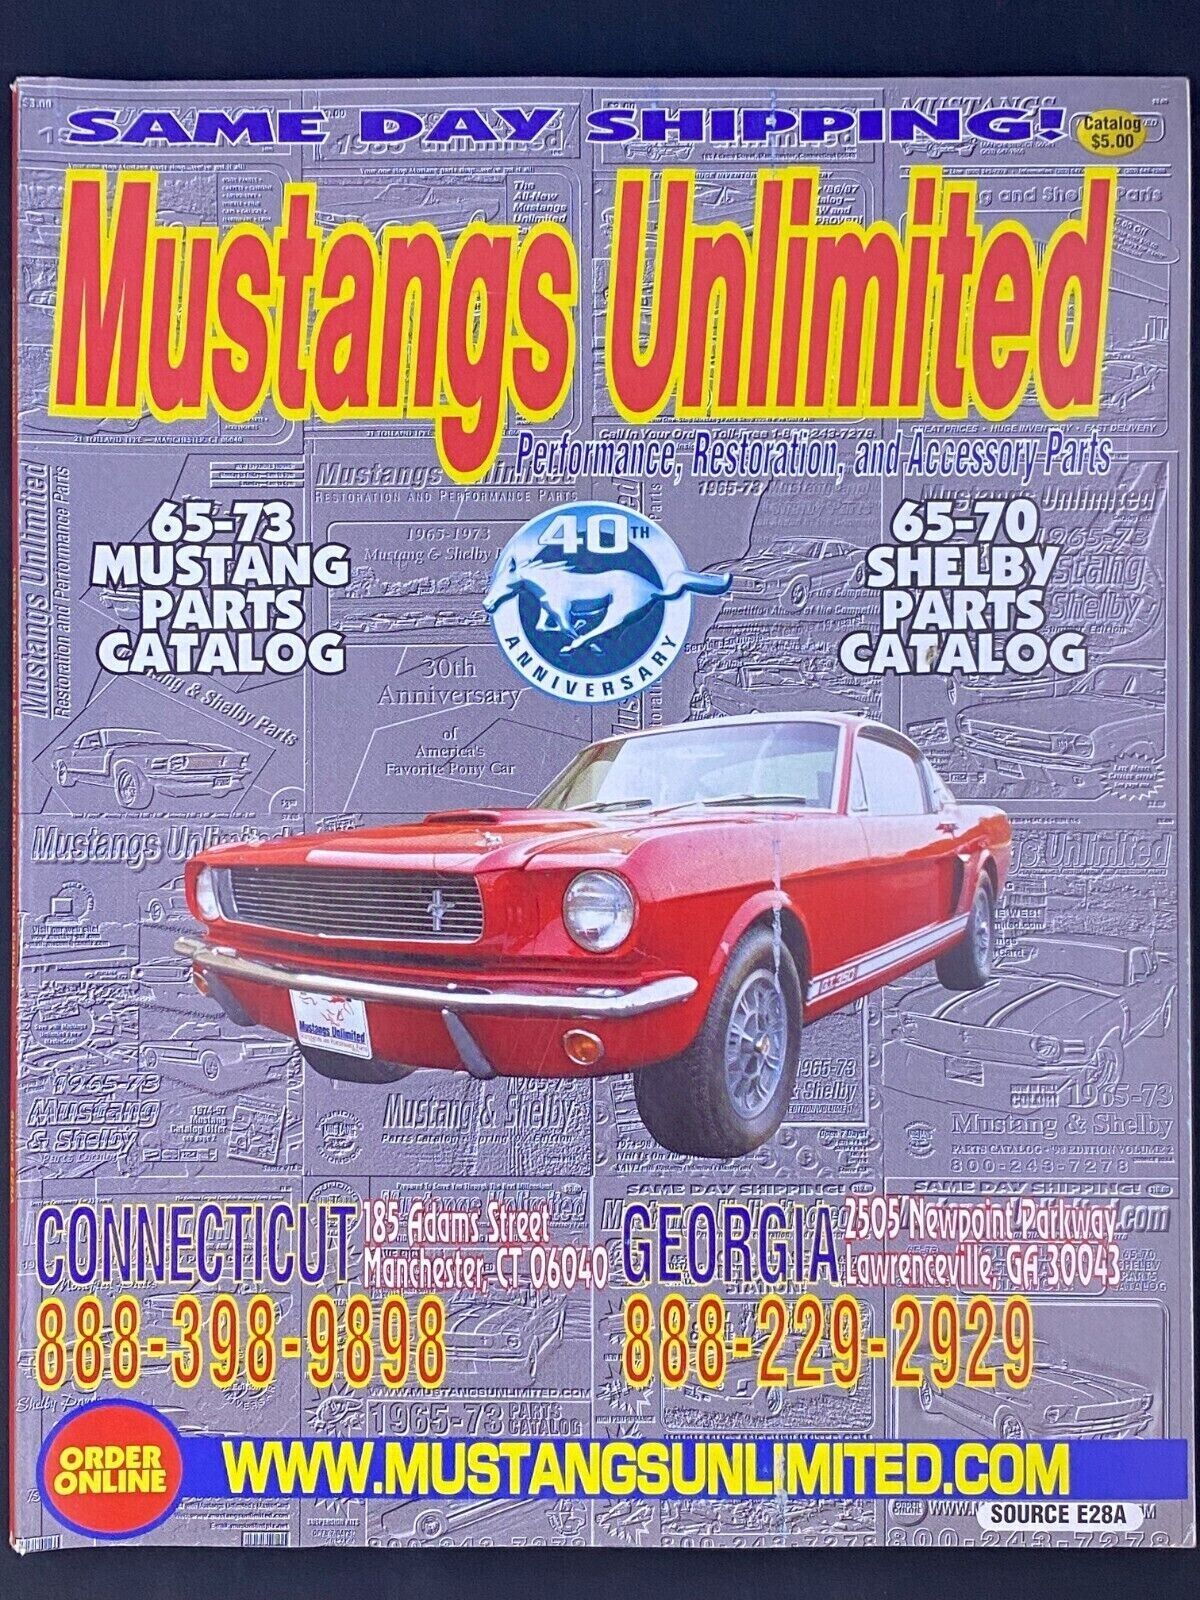 2004 Mustangs Unlimited 1965-73 Mustang & 1965-70 Shelby Parts Catalog